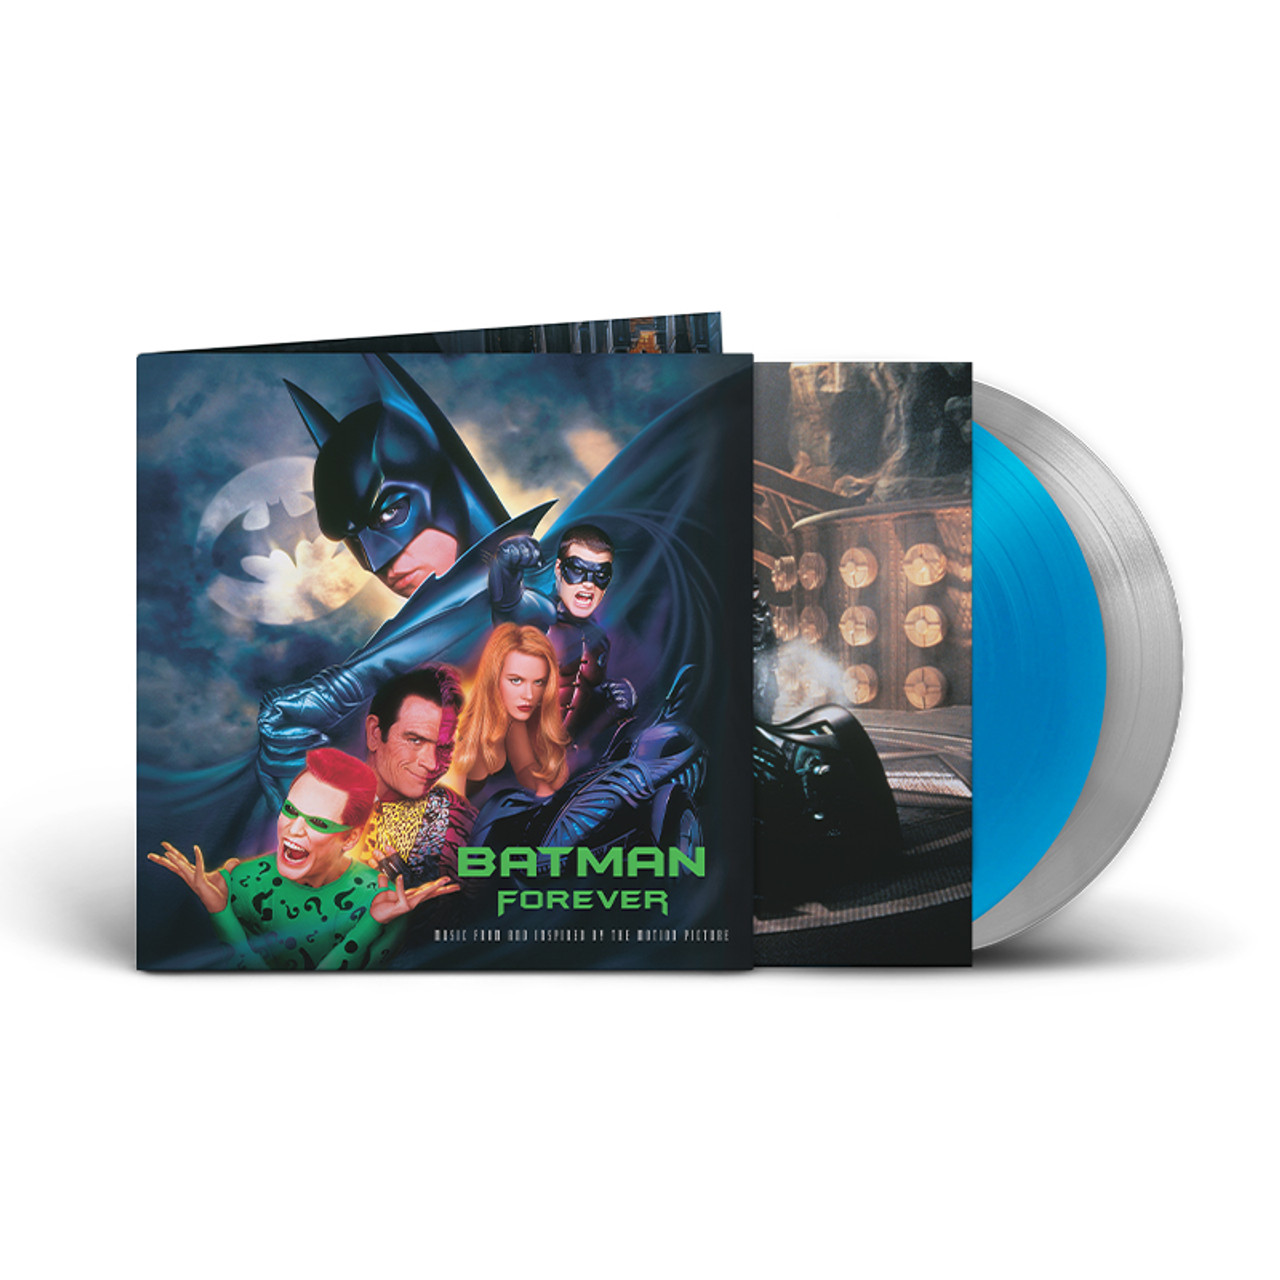 Special edition on Blue & Silver vinyl